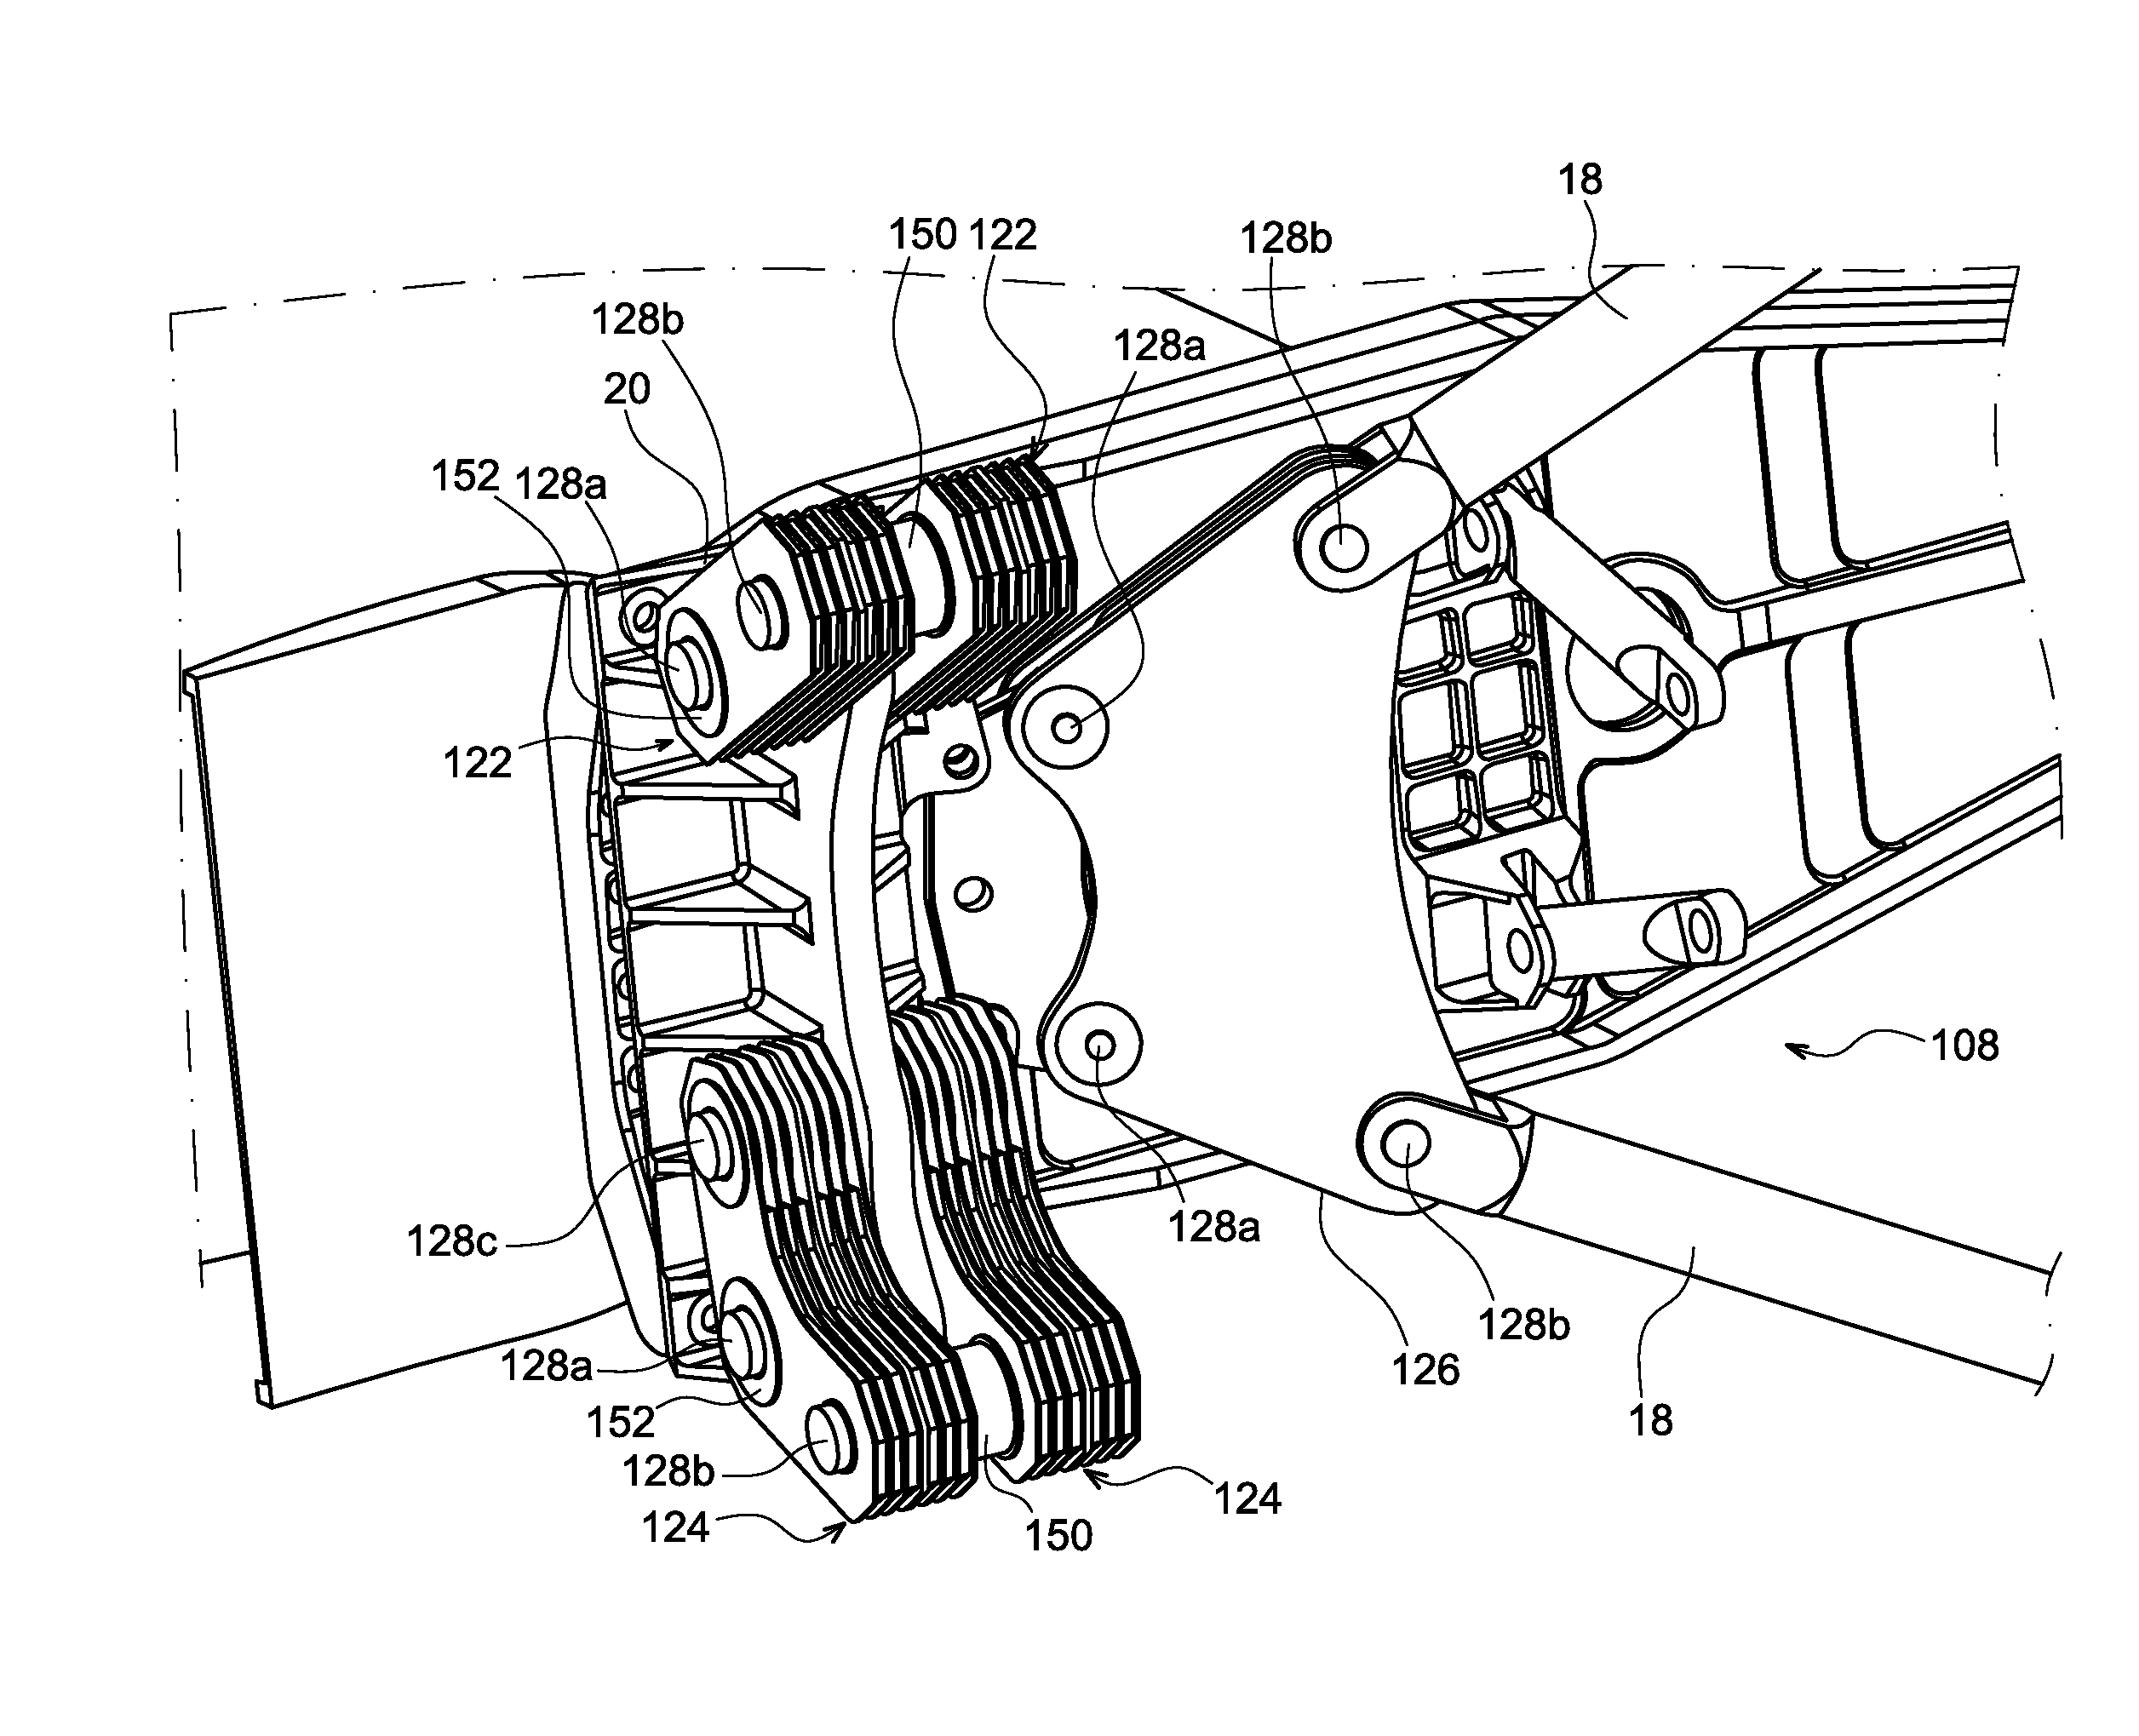 Flexible linking device for an aircraft propulsion system